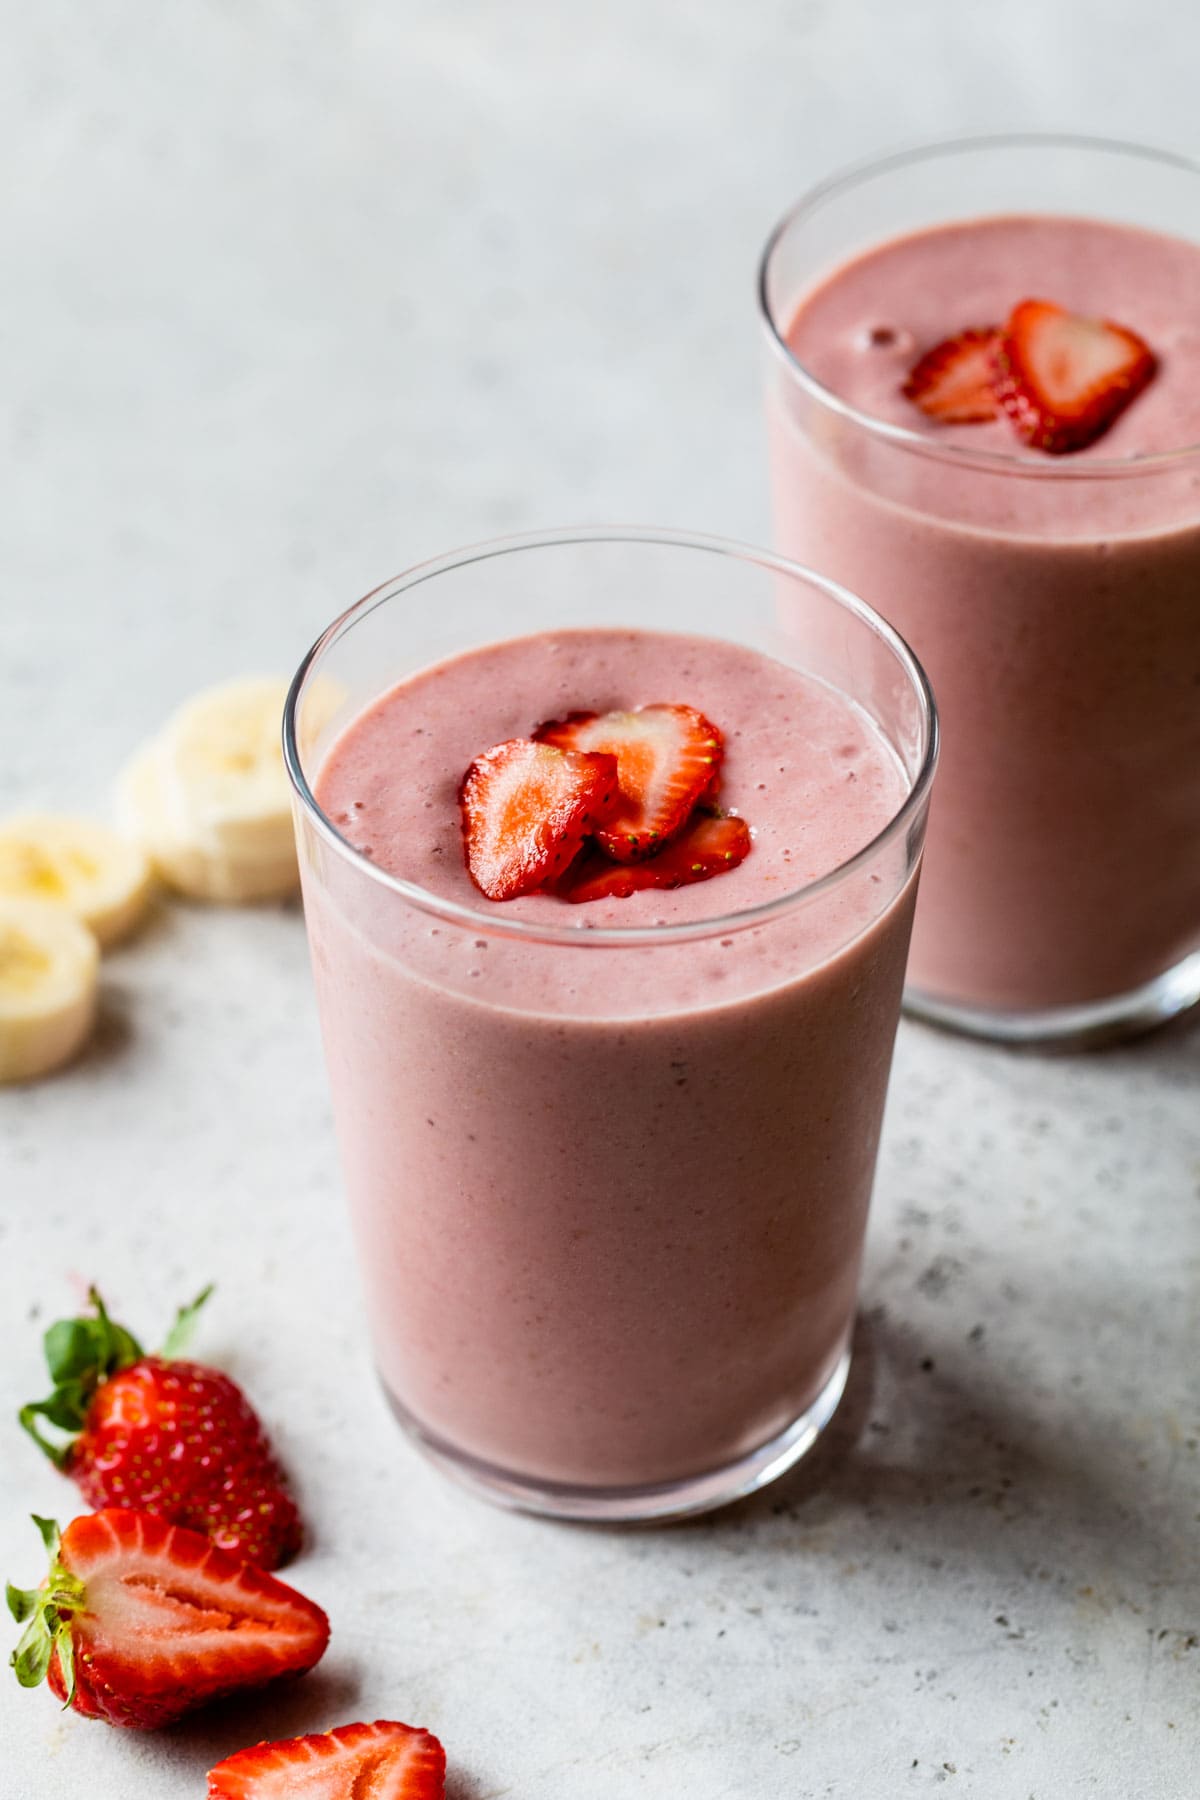 Sippable Breakfast: Strawberry Banana Smoothie